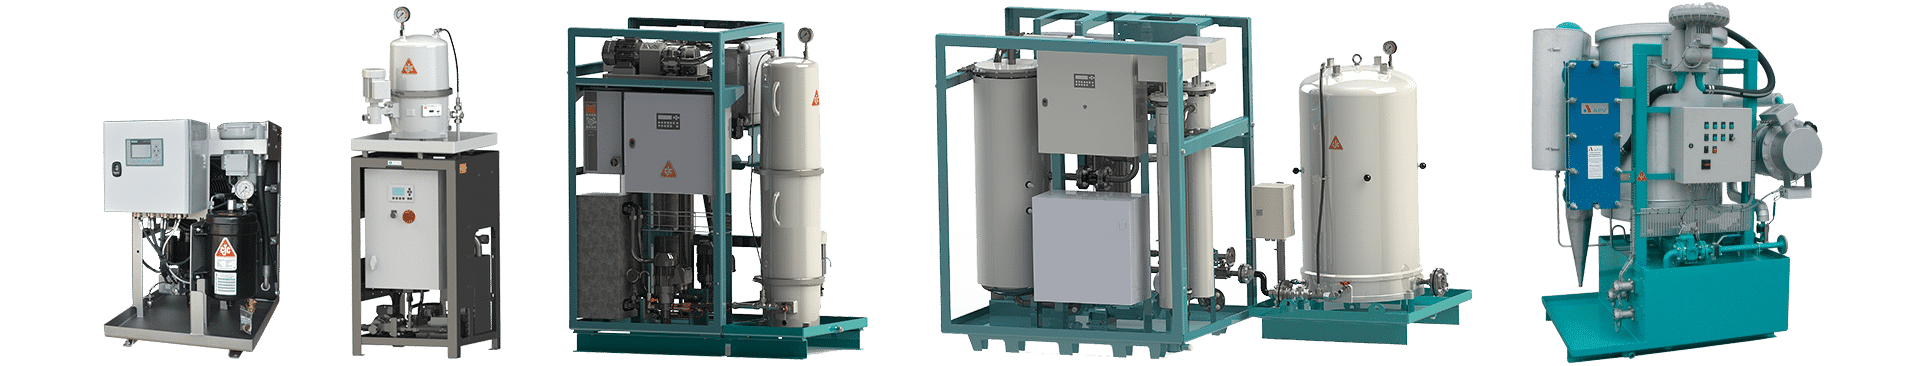 Desorbers and Desorber Filter Units, D40CU, Oil Recovery